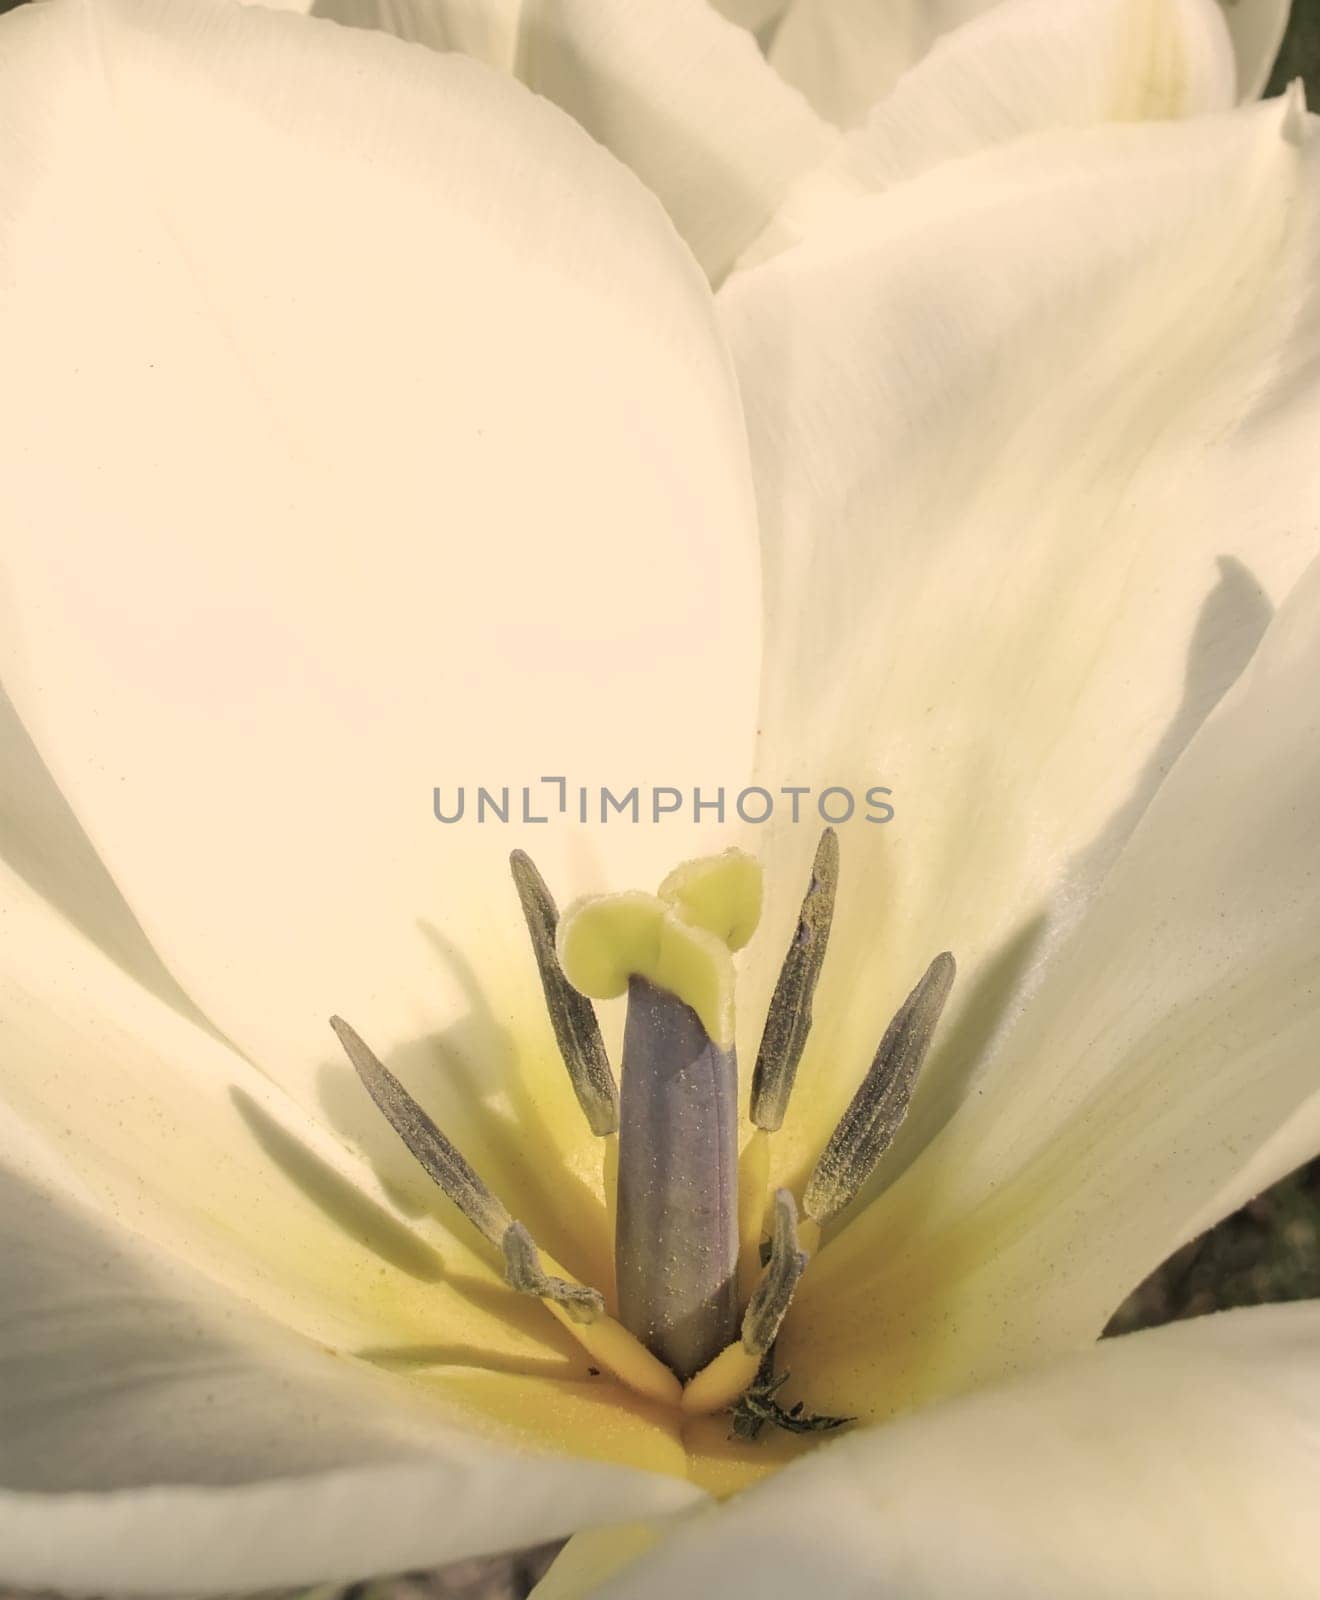 Closeup, white Tulips or flower on a sunny day for growing, gardening and romantic bouquet for love. Leaf, blossom and floral plant in nature for season change, gift or florist with bright color by YuriArcurs